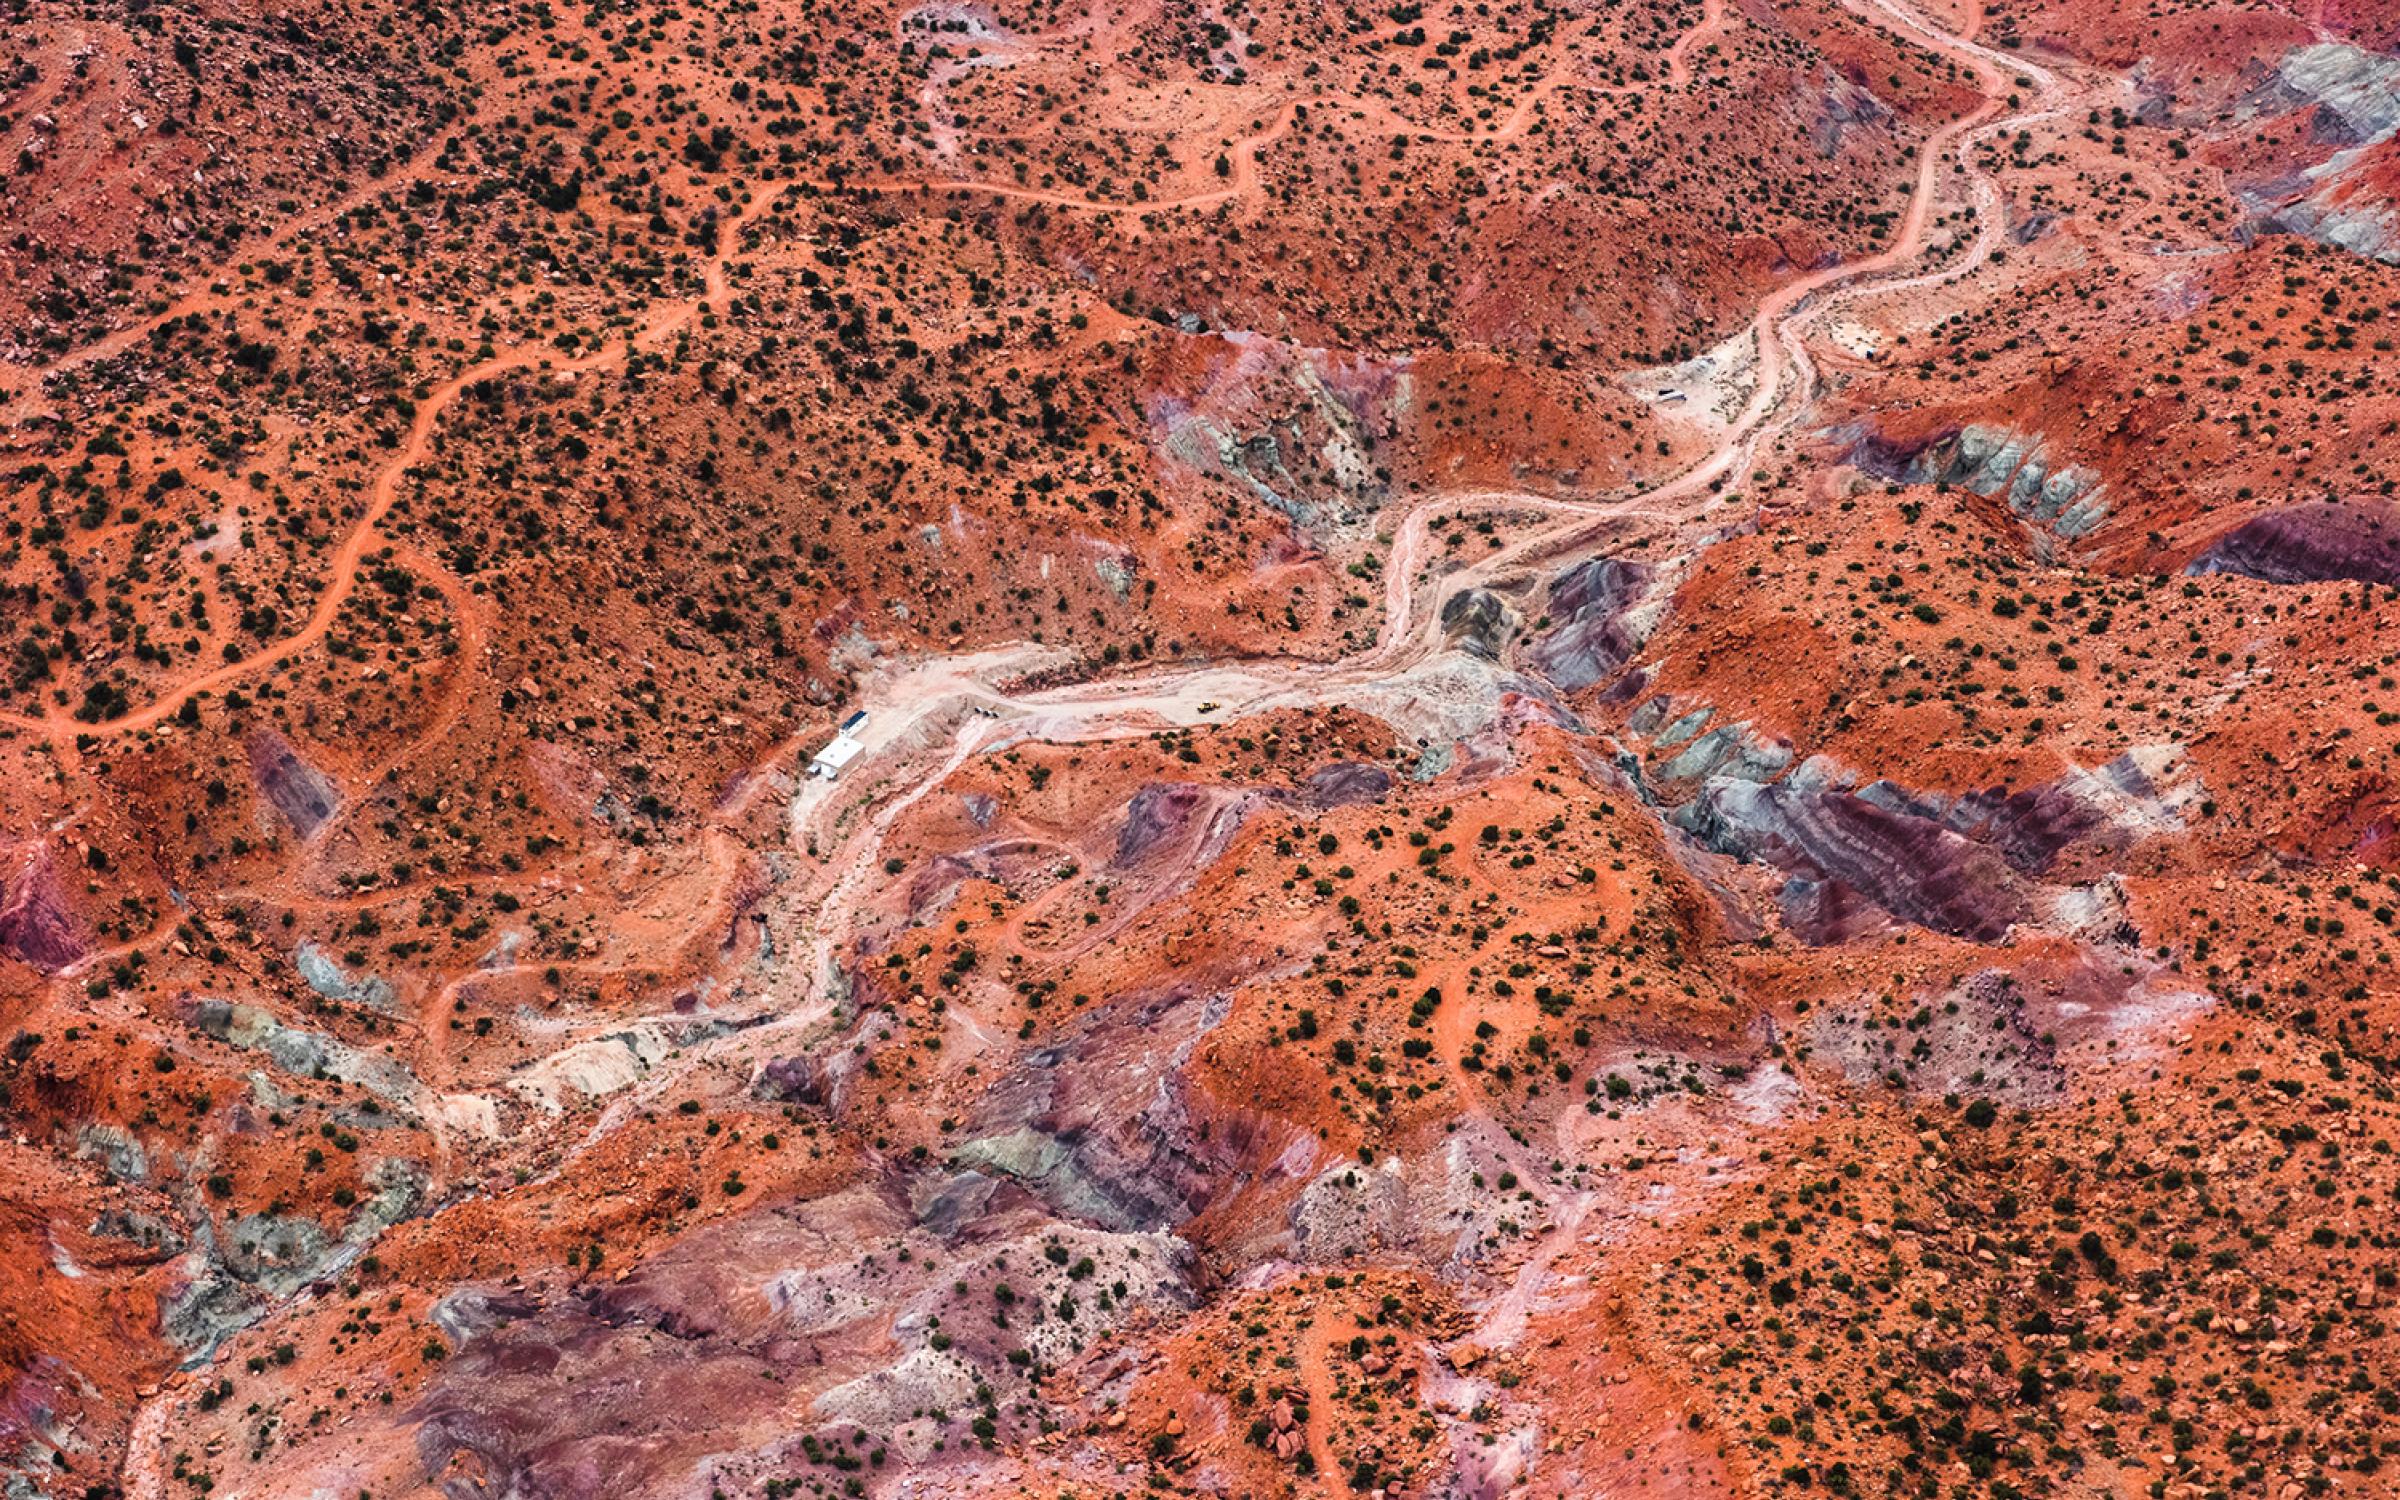 A bird's eye view photo of a rust-colored landscape. You can see mountain tops, greenery and a dried up river bed winding between.